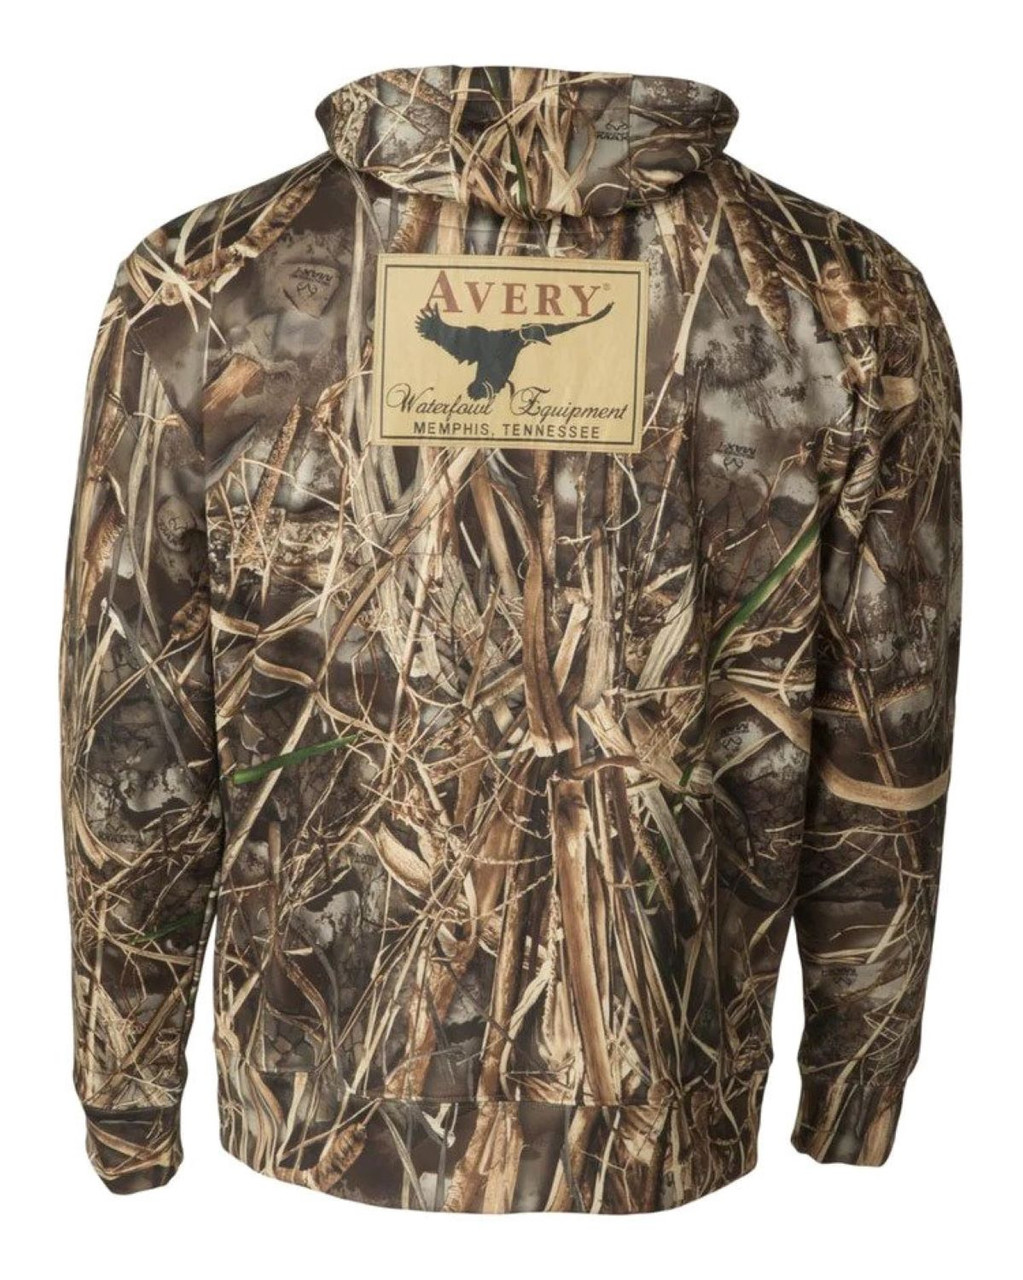 Banded Avery Embroidered Logo Hoodie Sweatshirt - Realtree Max-7 - 2XL